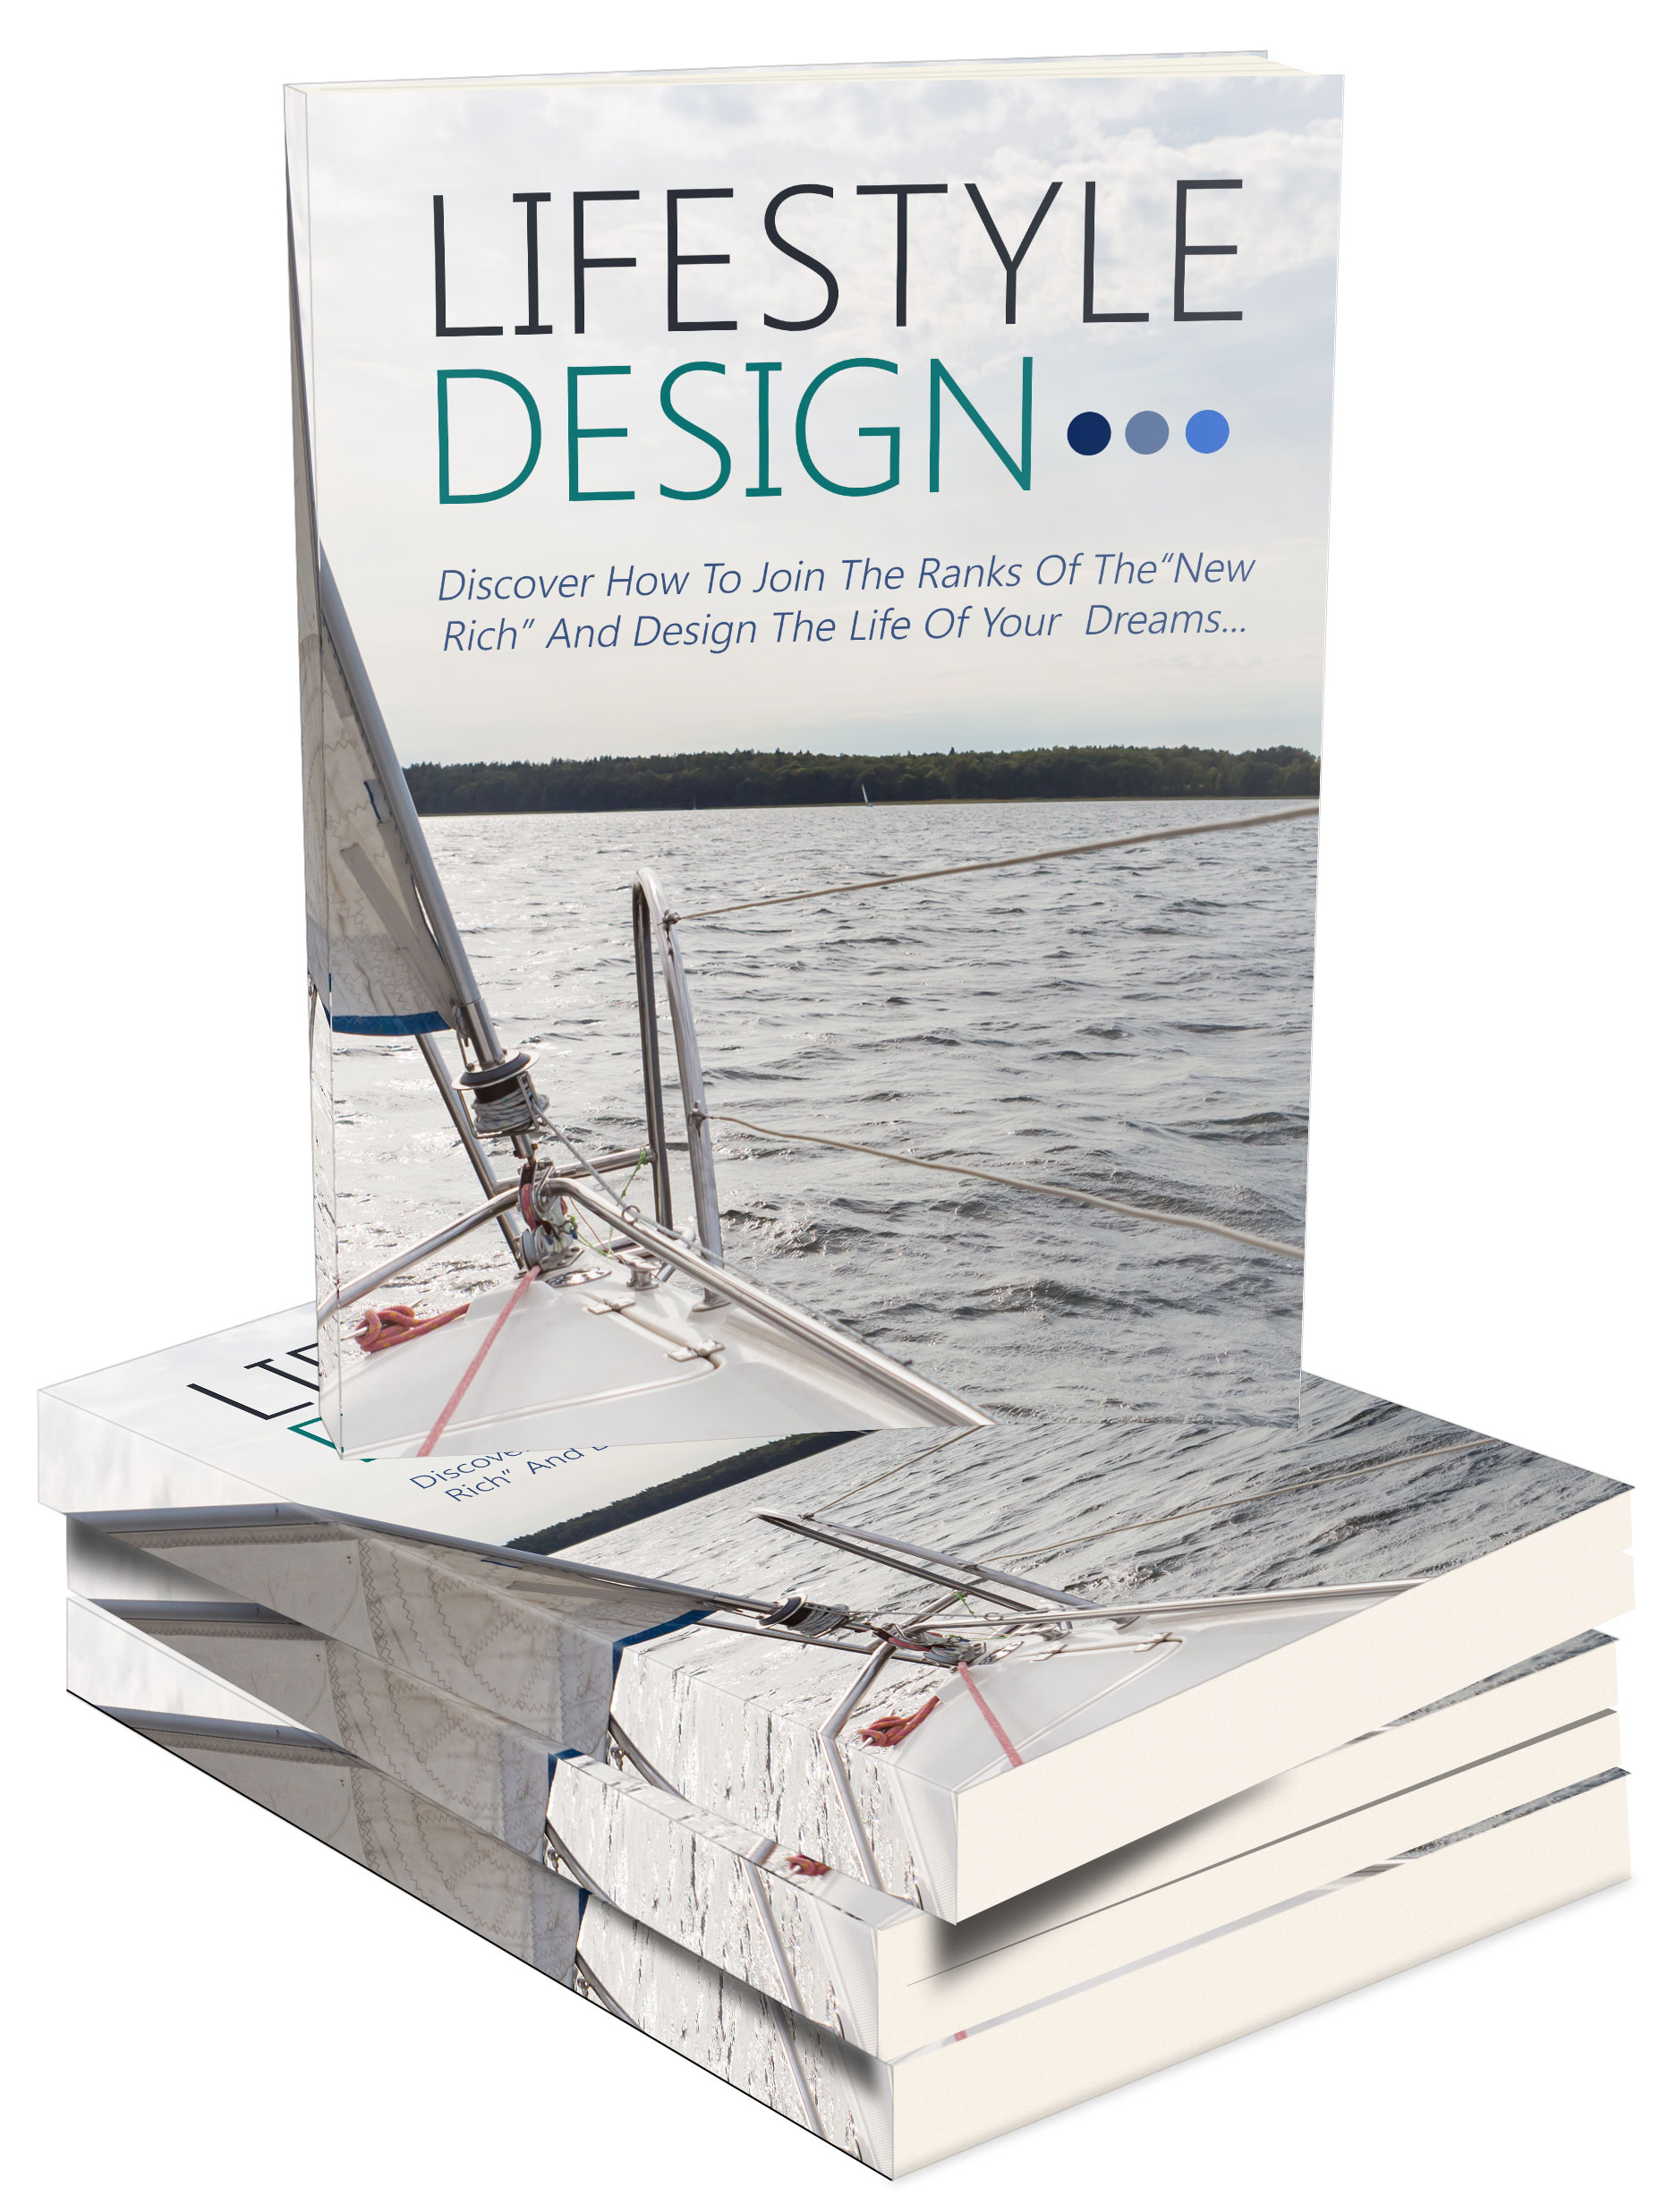 lifestyle design ebook and videos